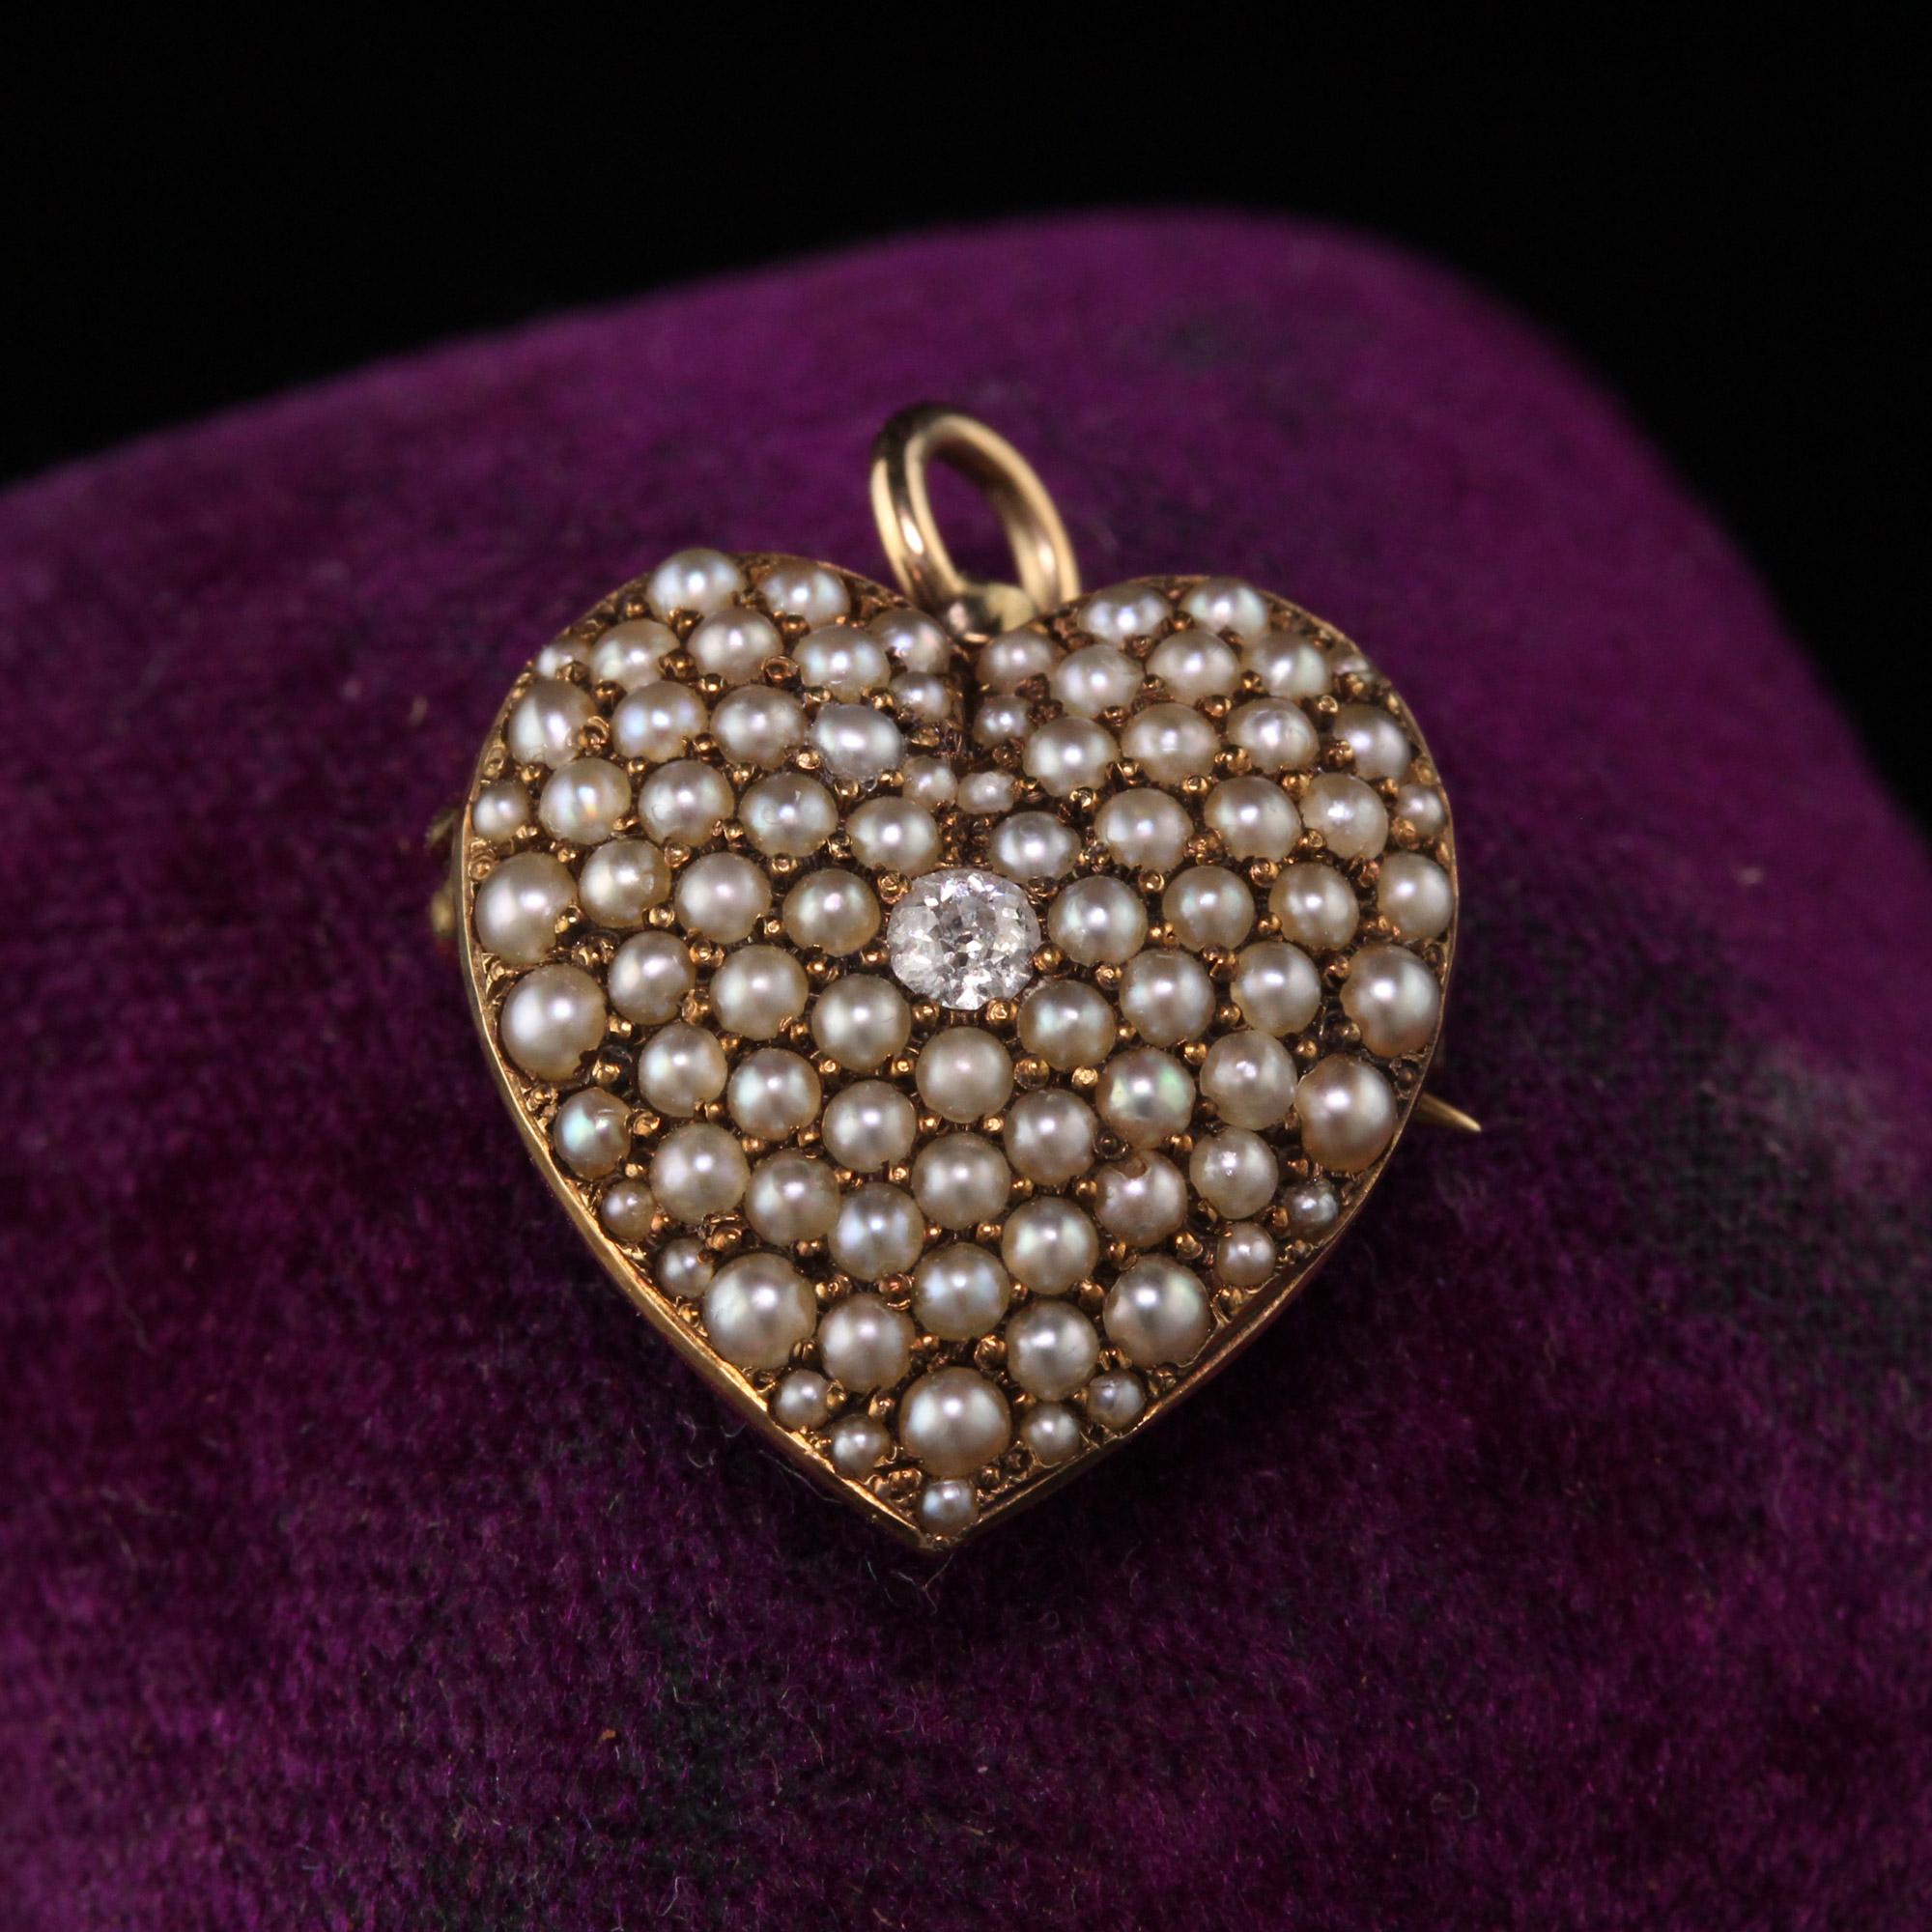 Beautiful Antique Victorian 14K Yellow Gold Diamond and Natural Pearl Heart Pendant Pin. This amazing piece can be worn as a pin or a pendant. The item is in amazing condition and just a wonderful piece to own.

Item #P0111

Metal: 14K Yellow